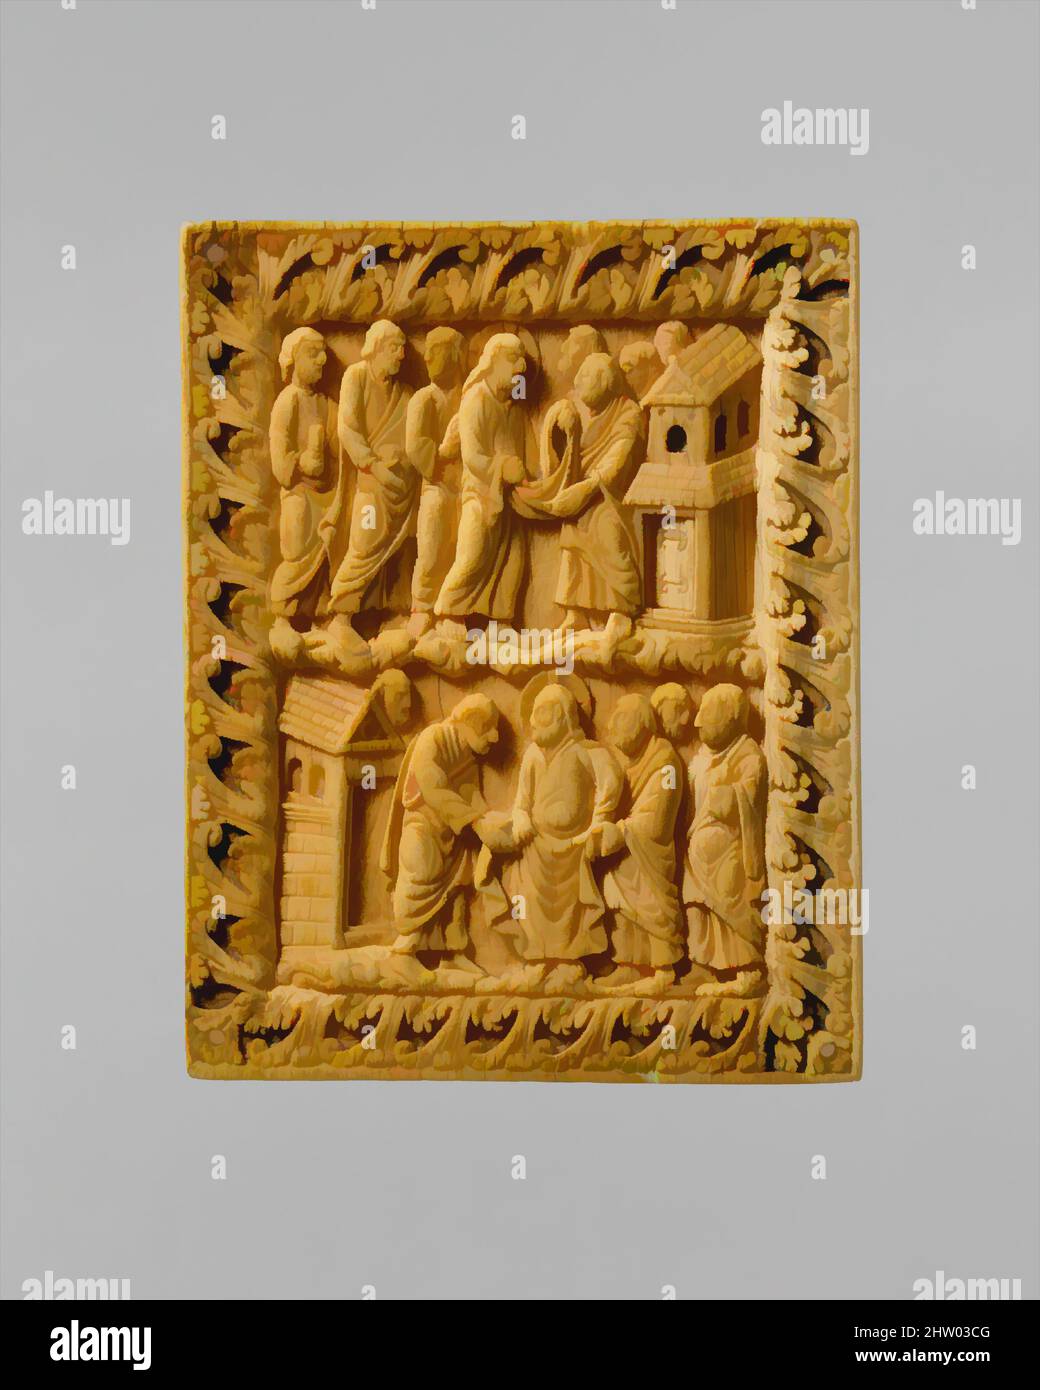 Art inspired by Two Scenes of Christ and the Apostles, ca. 850–900, Made in Reims (perhaps), France, French, Elephant ivory with traces of paint, 3 7/8 x 3 1/16 x 3/16 in. (9.9 x 7.8 x 0.5 cm), Ivories, The story depicted on this ivory focuses on a garment that Jesus seems to be giving, Classic works modernized by Artotop with a splash of modernity. Shapes, color and value, eye-catching visual impact on art. Emotions through freedom of artworks in a contemporary way. A timeless message pursuing a wildly creative new direction. Artists turning to the digital medium and creating the Artotop NFT Stock Photo